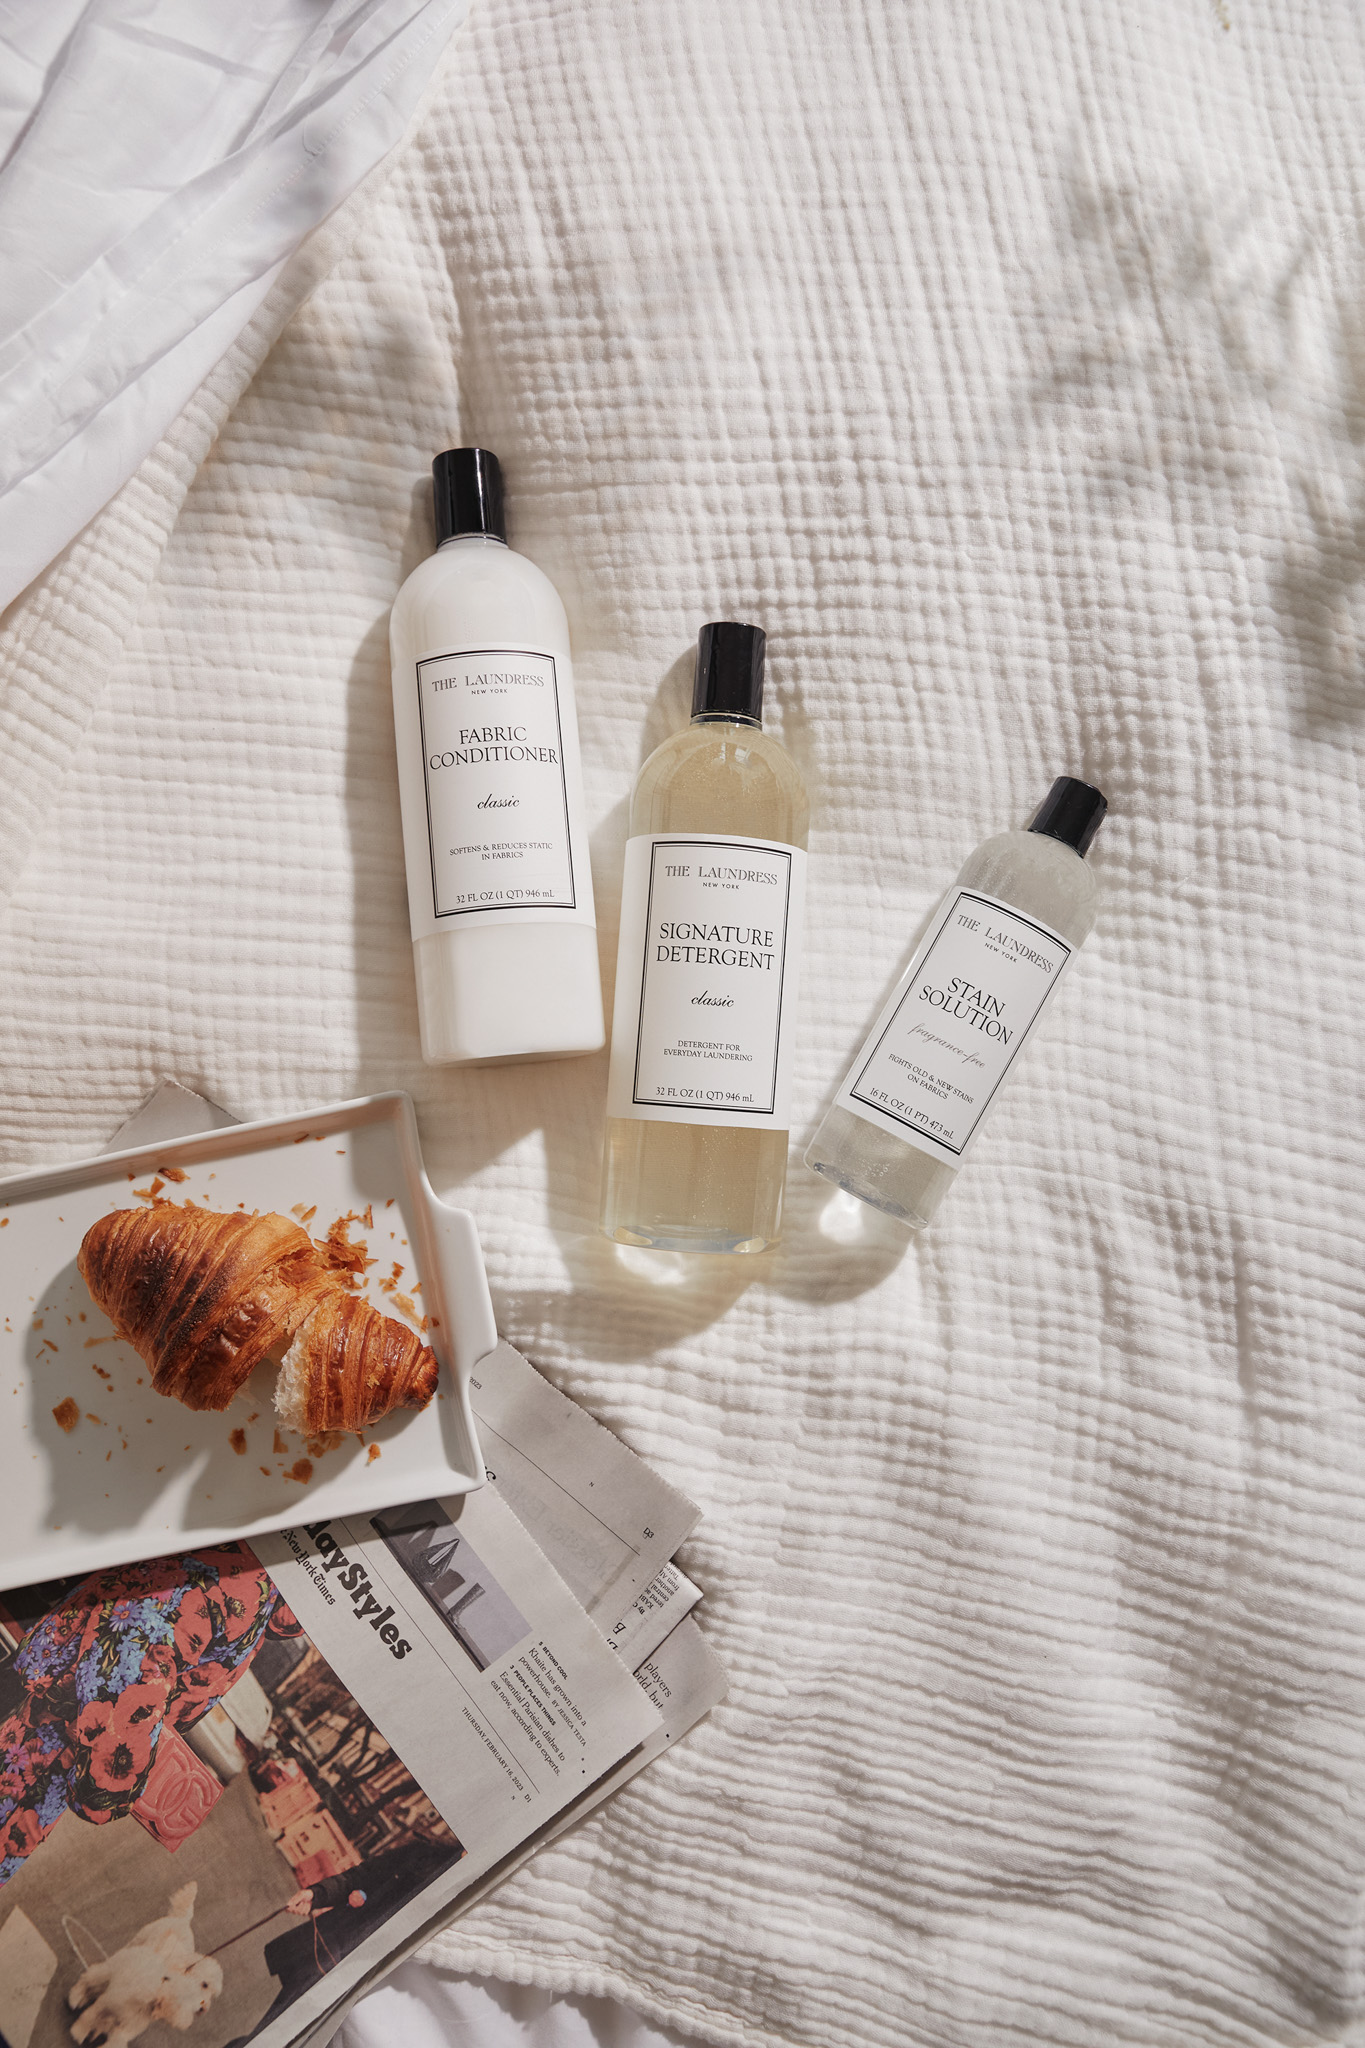 laundress products laying on bedding